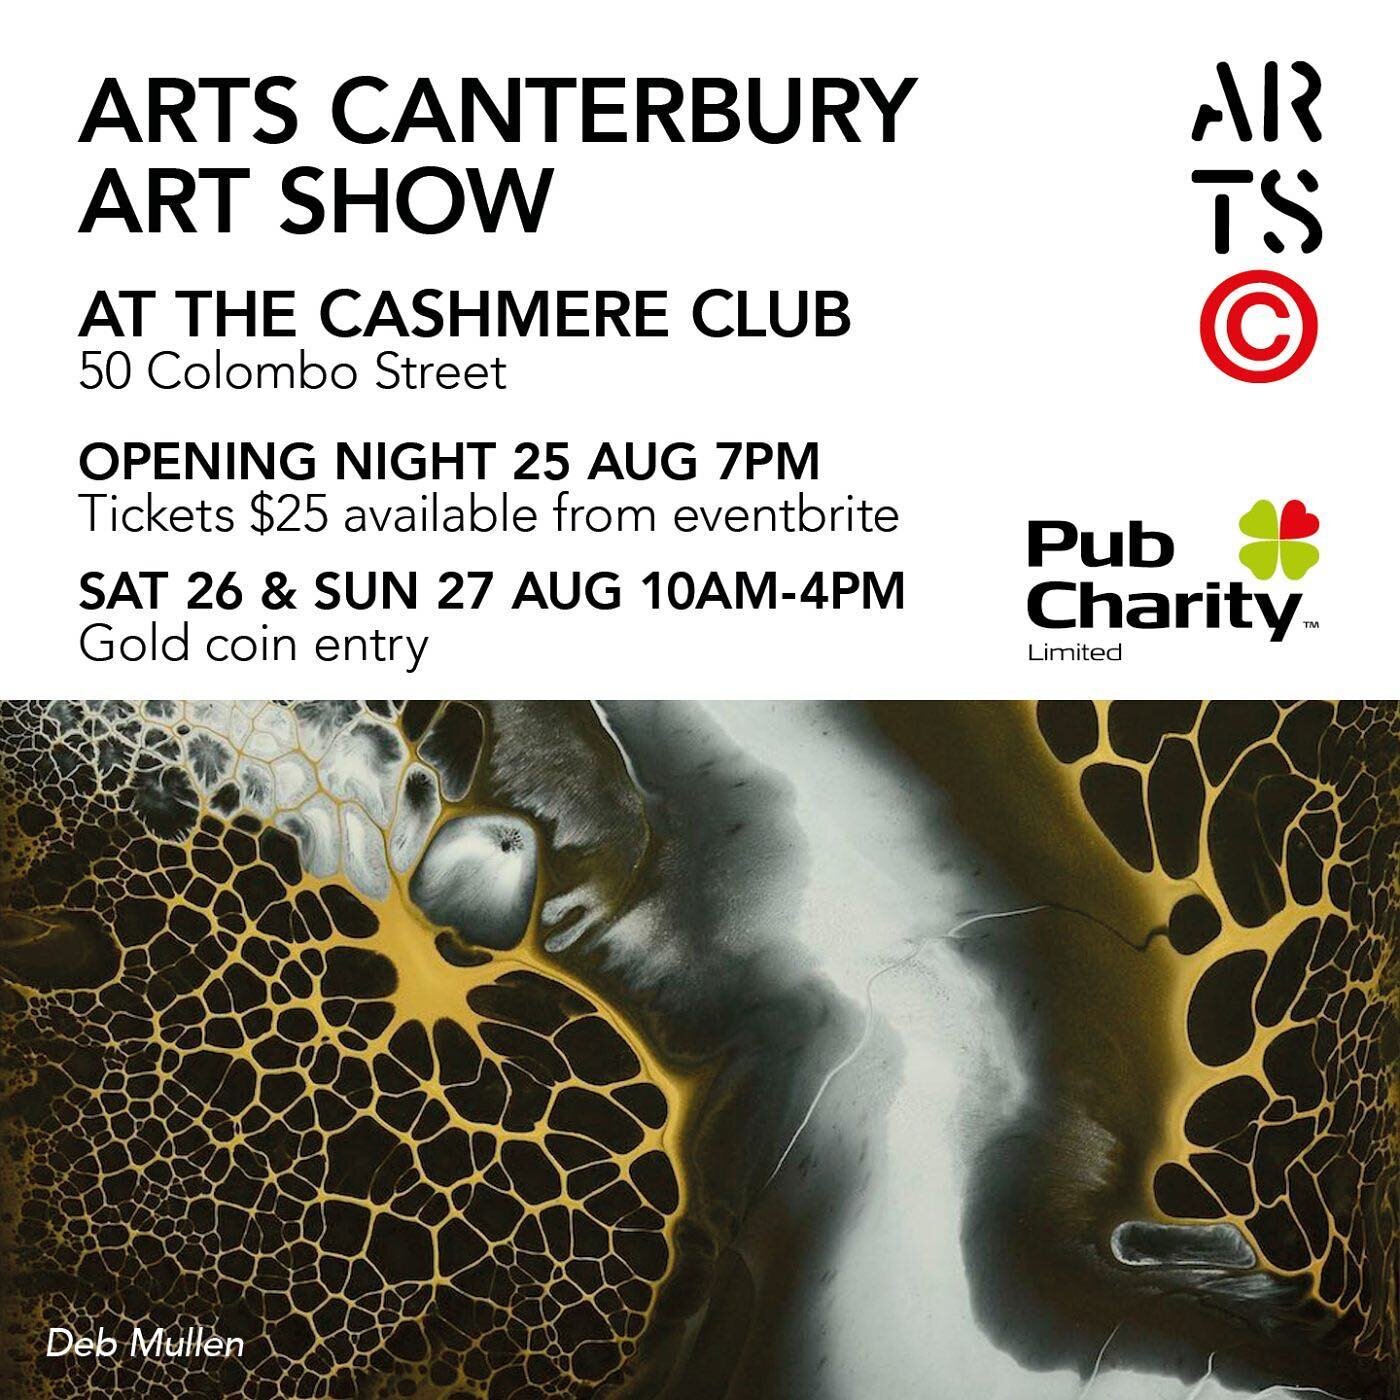 Am going to be at Cashmere Art Show @artscanterbury this weekend!  Come and see my latest drawings

#nzart #nzartist #deepdetaildrawing